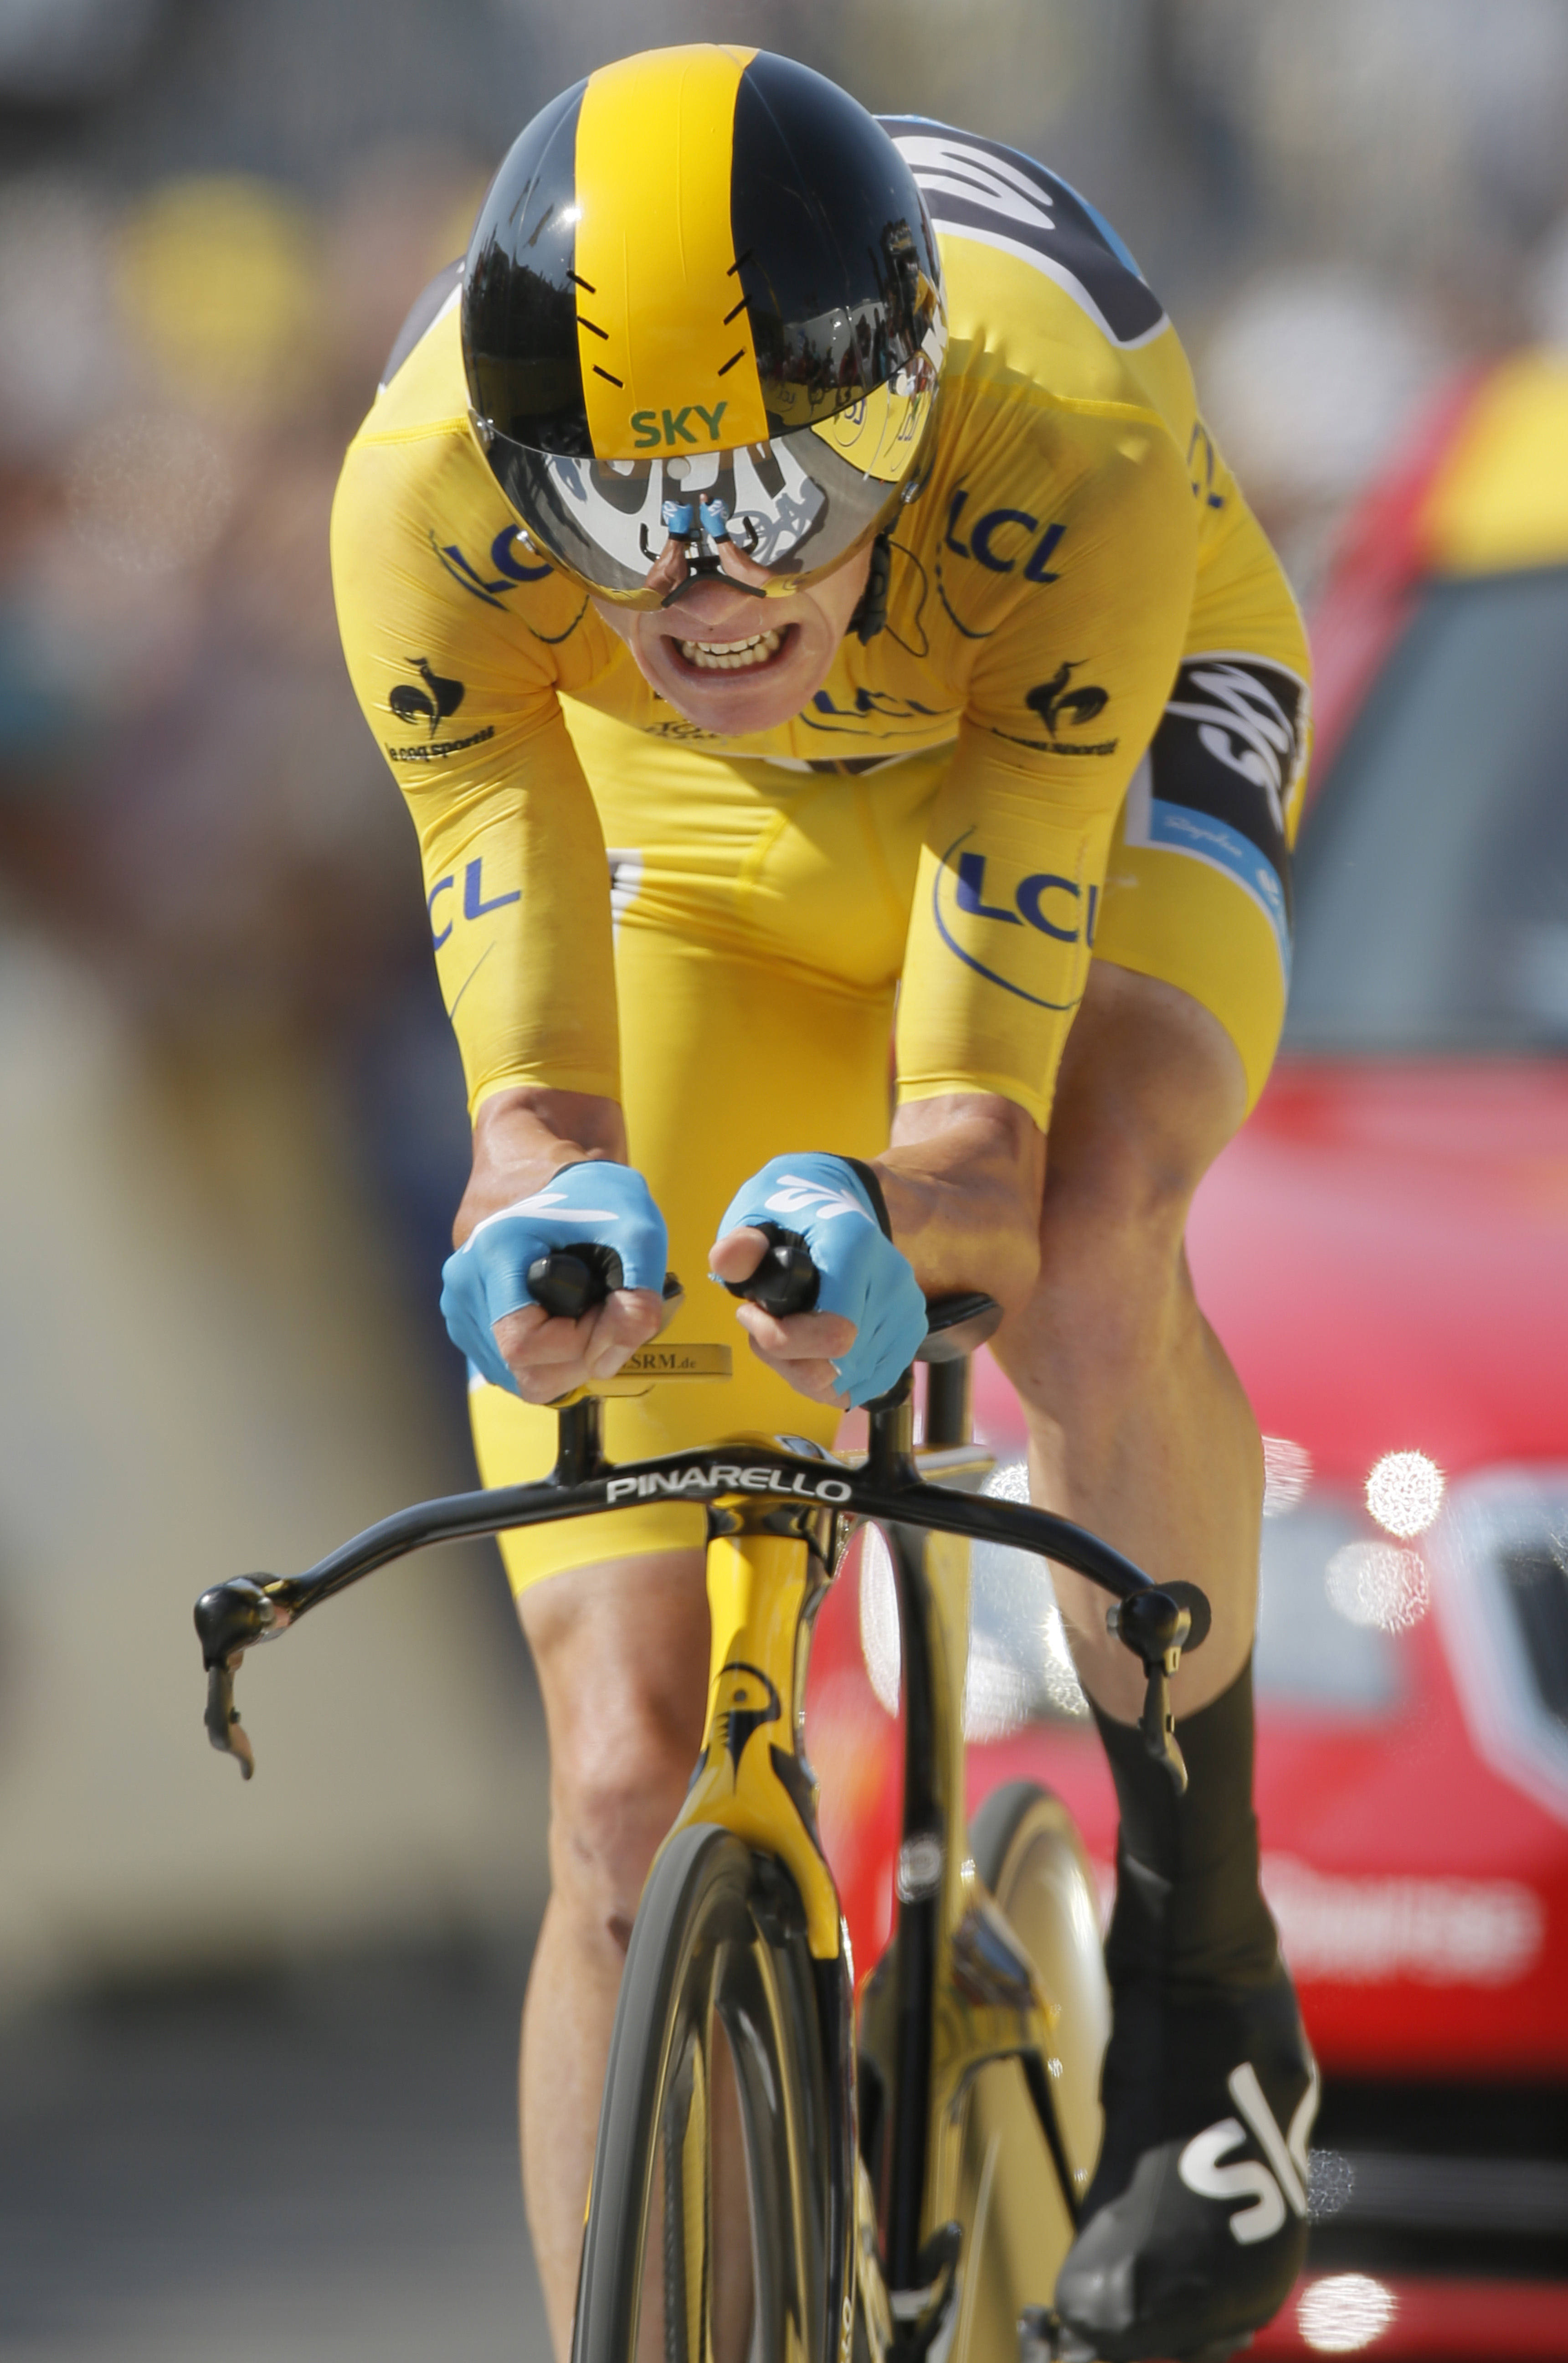 Top class Chris Froome near unbeatable at Tour de France after time